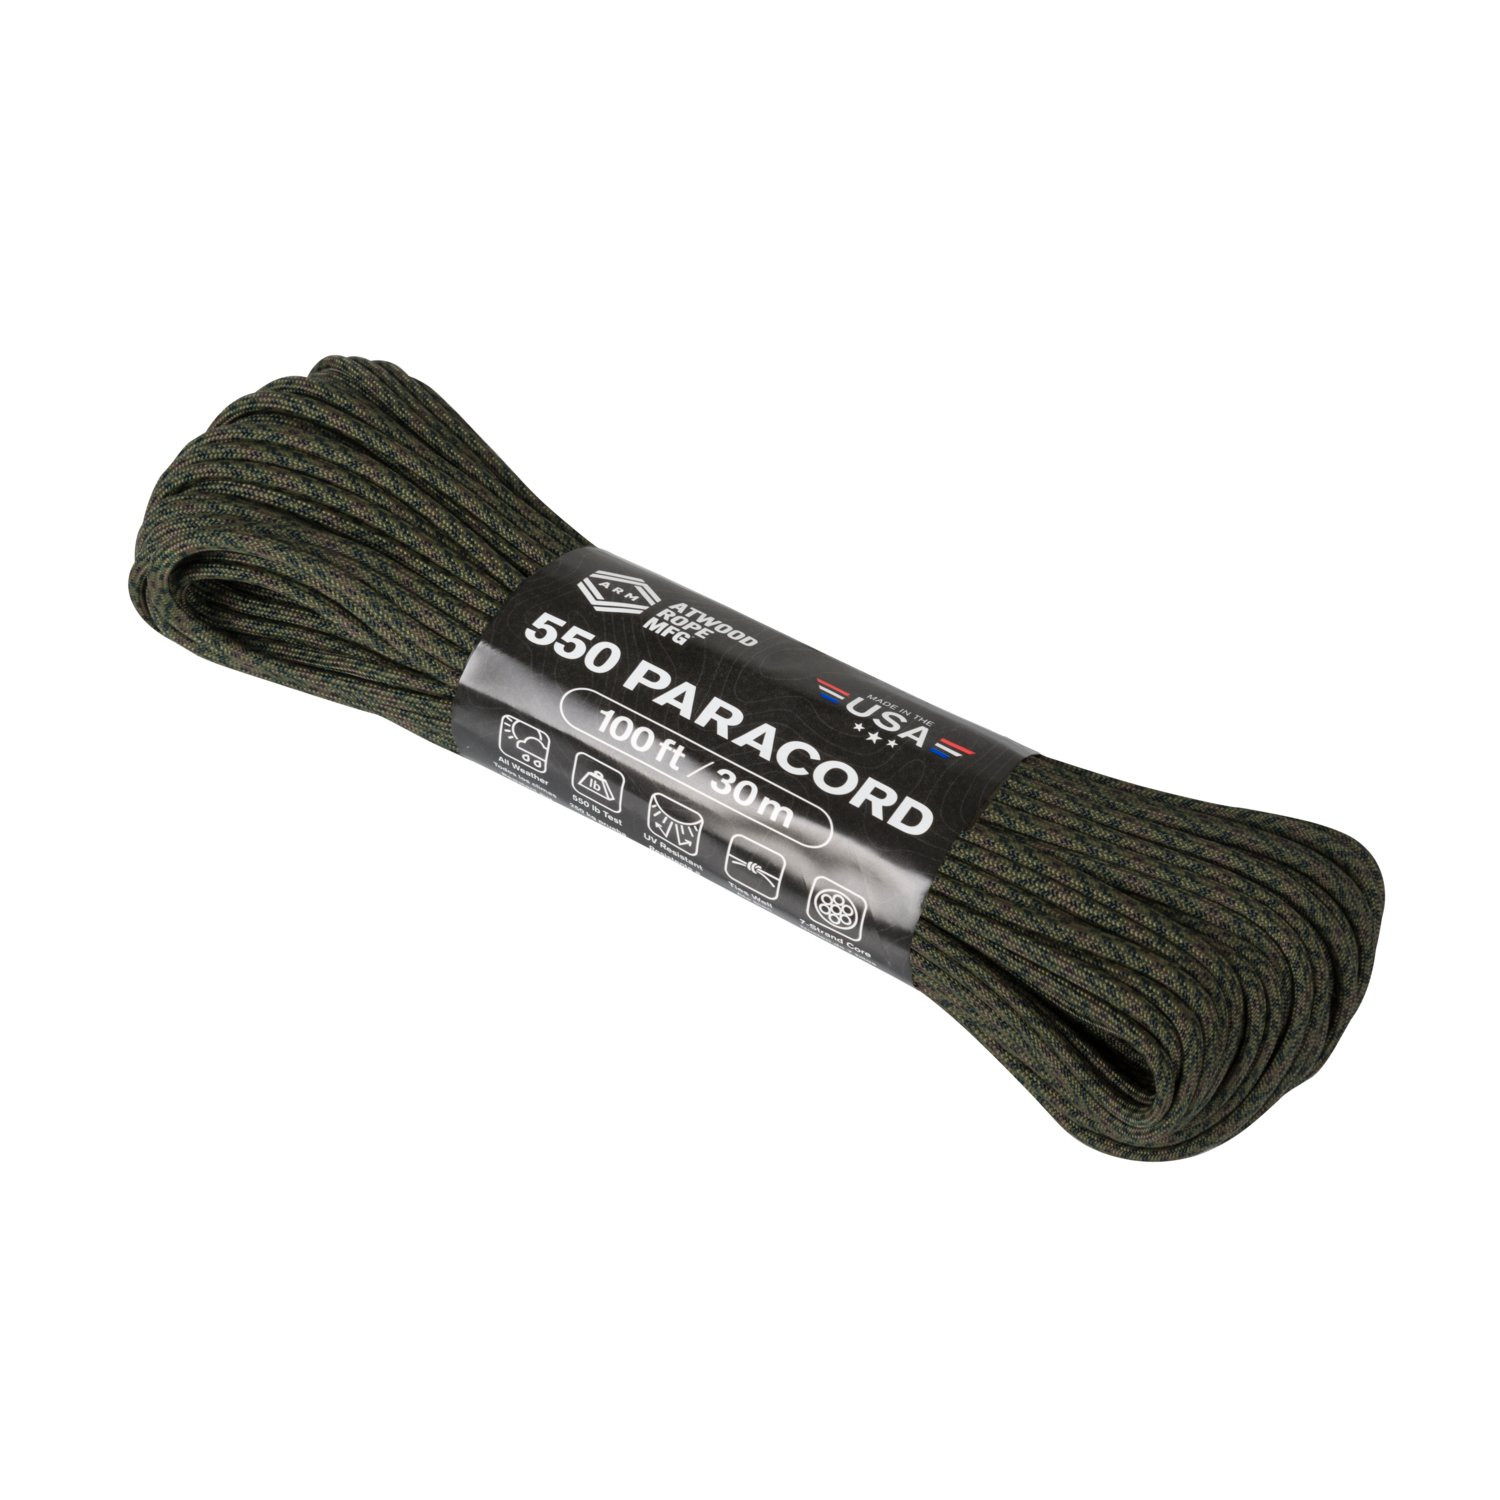 30m Paracord Survival Rope - Usb C, Bank Line, Rope Access Gear